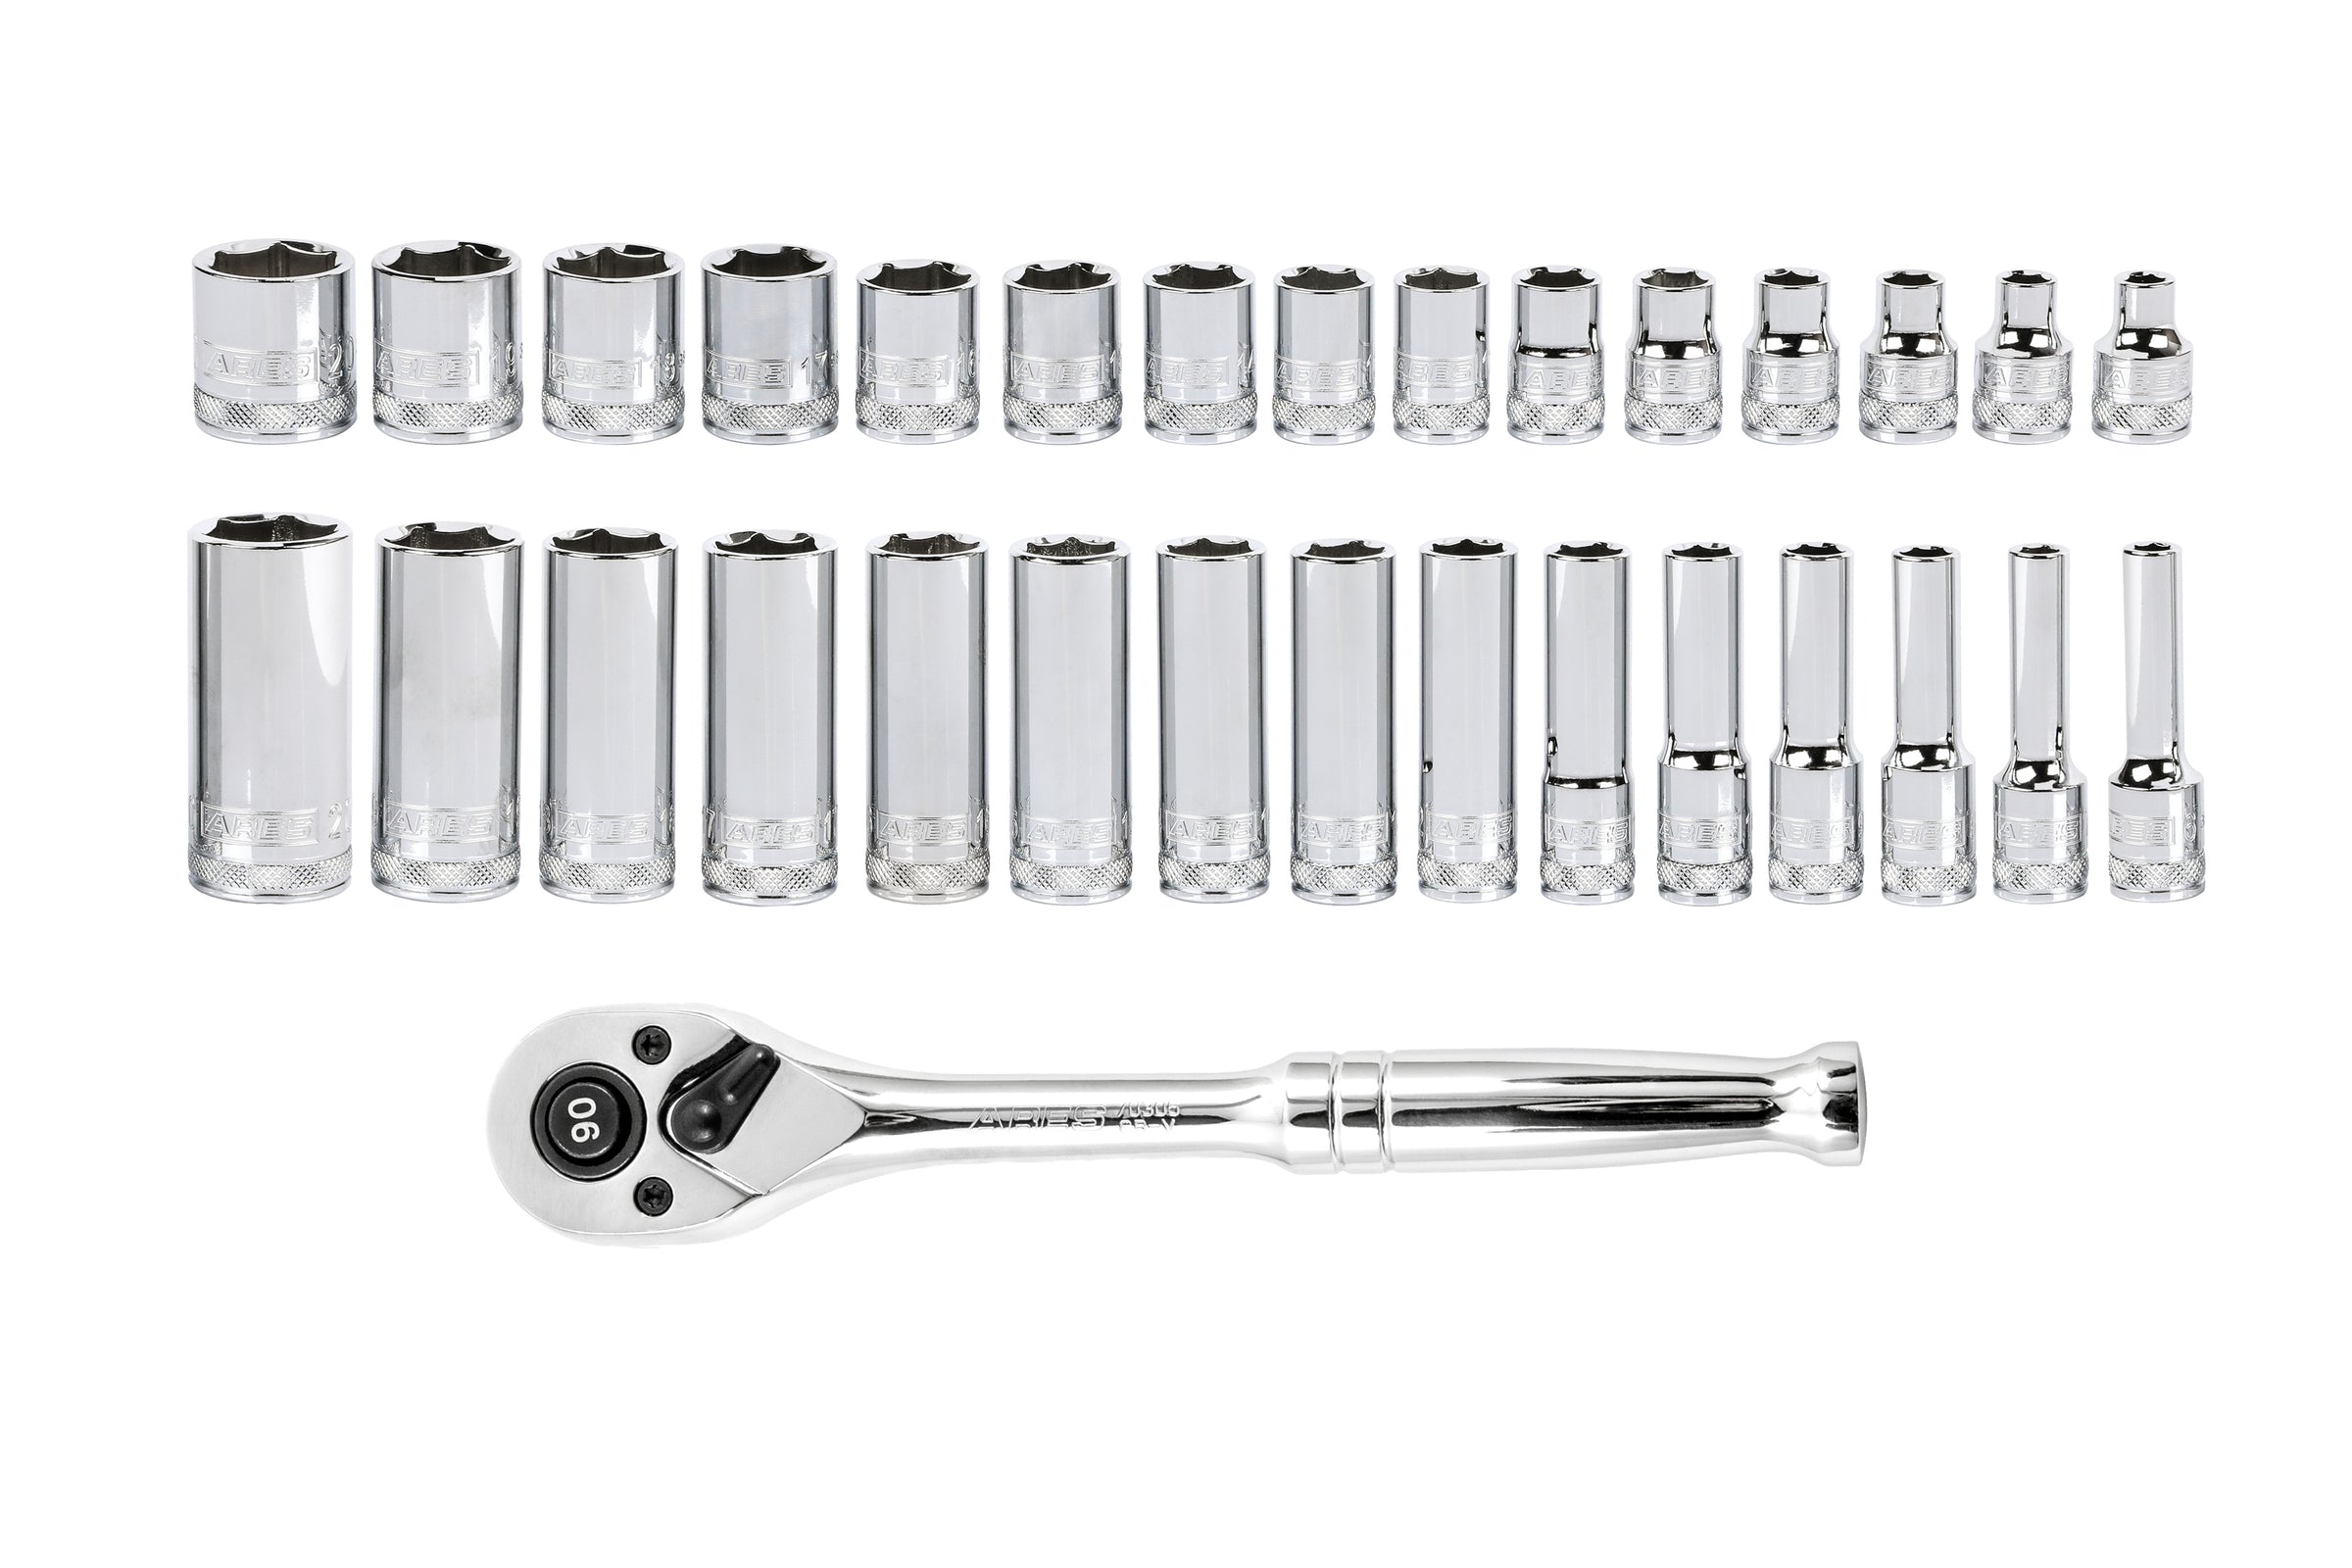 Tool, Button-Hook Kit, Wrench & 3/8 Drive Socket, SS